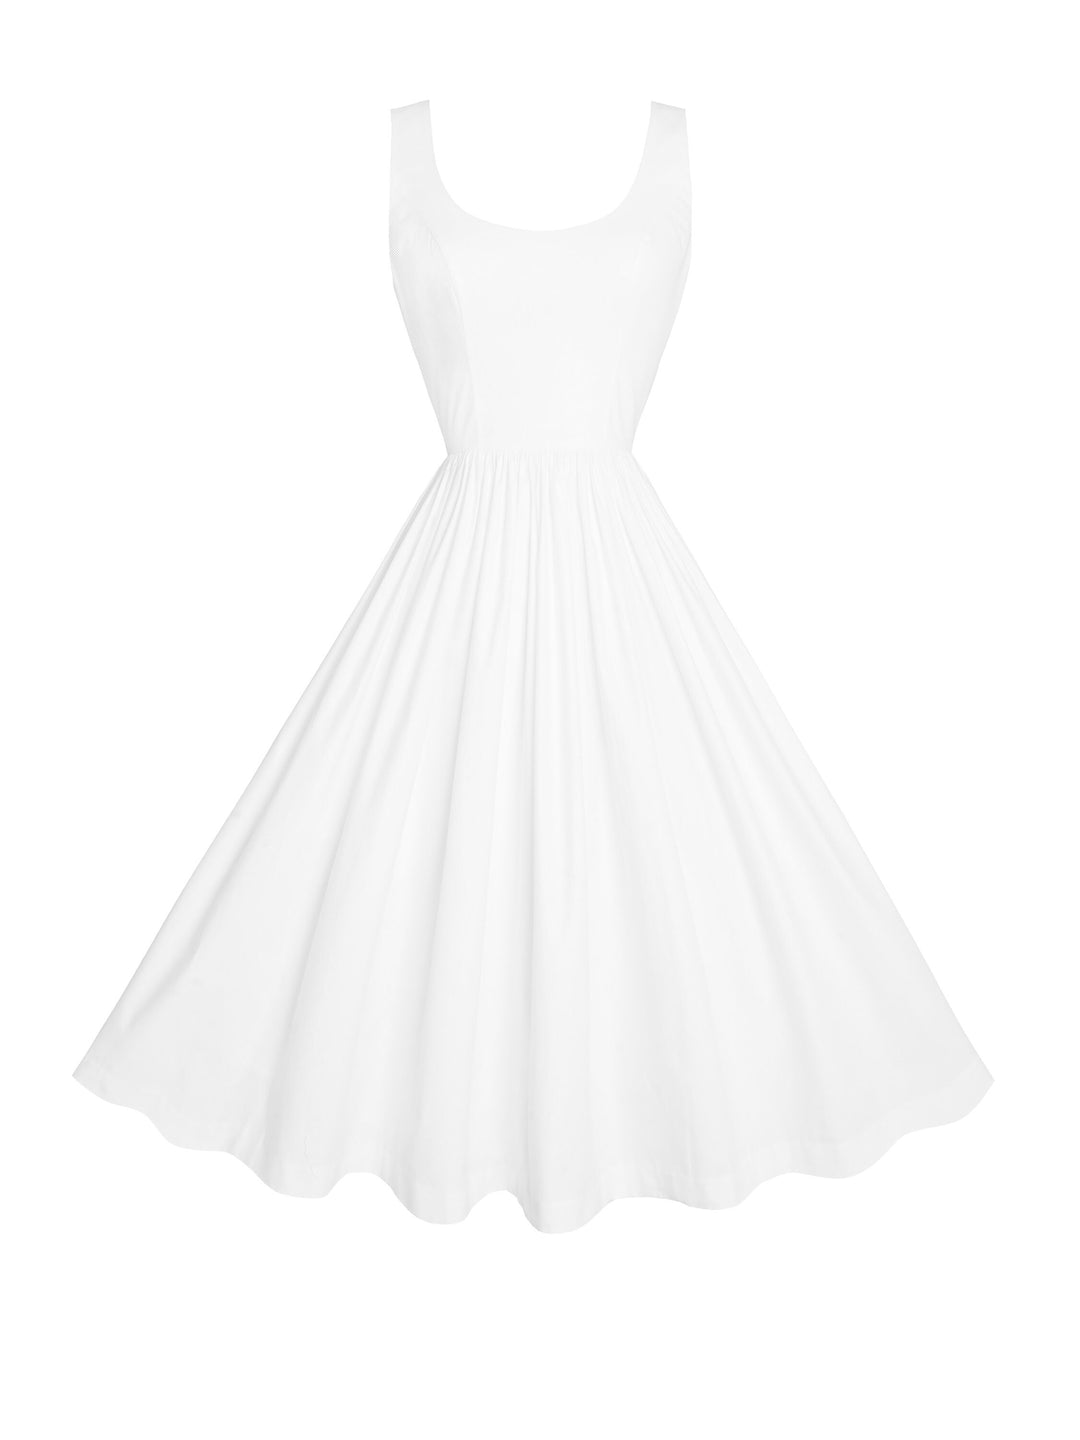 RTS - Size S - Emily Dress in White Cotton